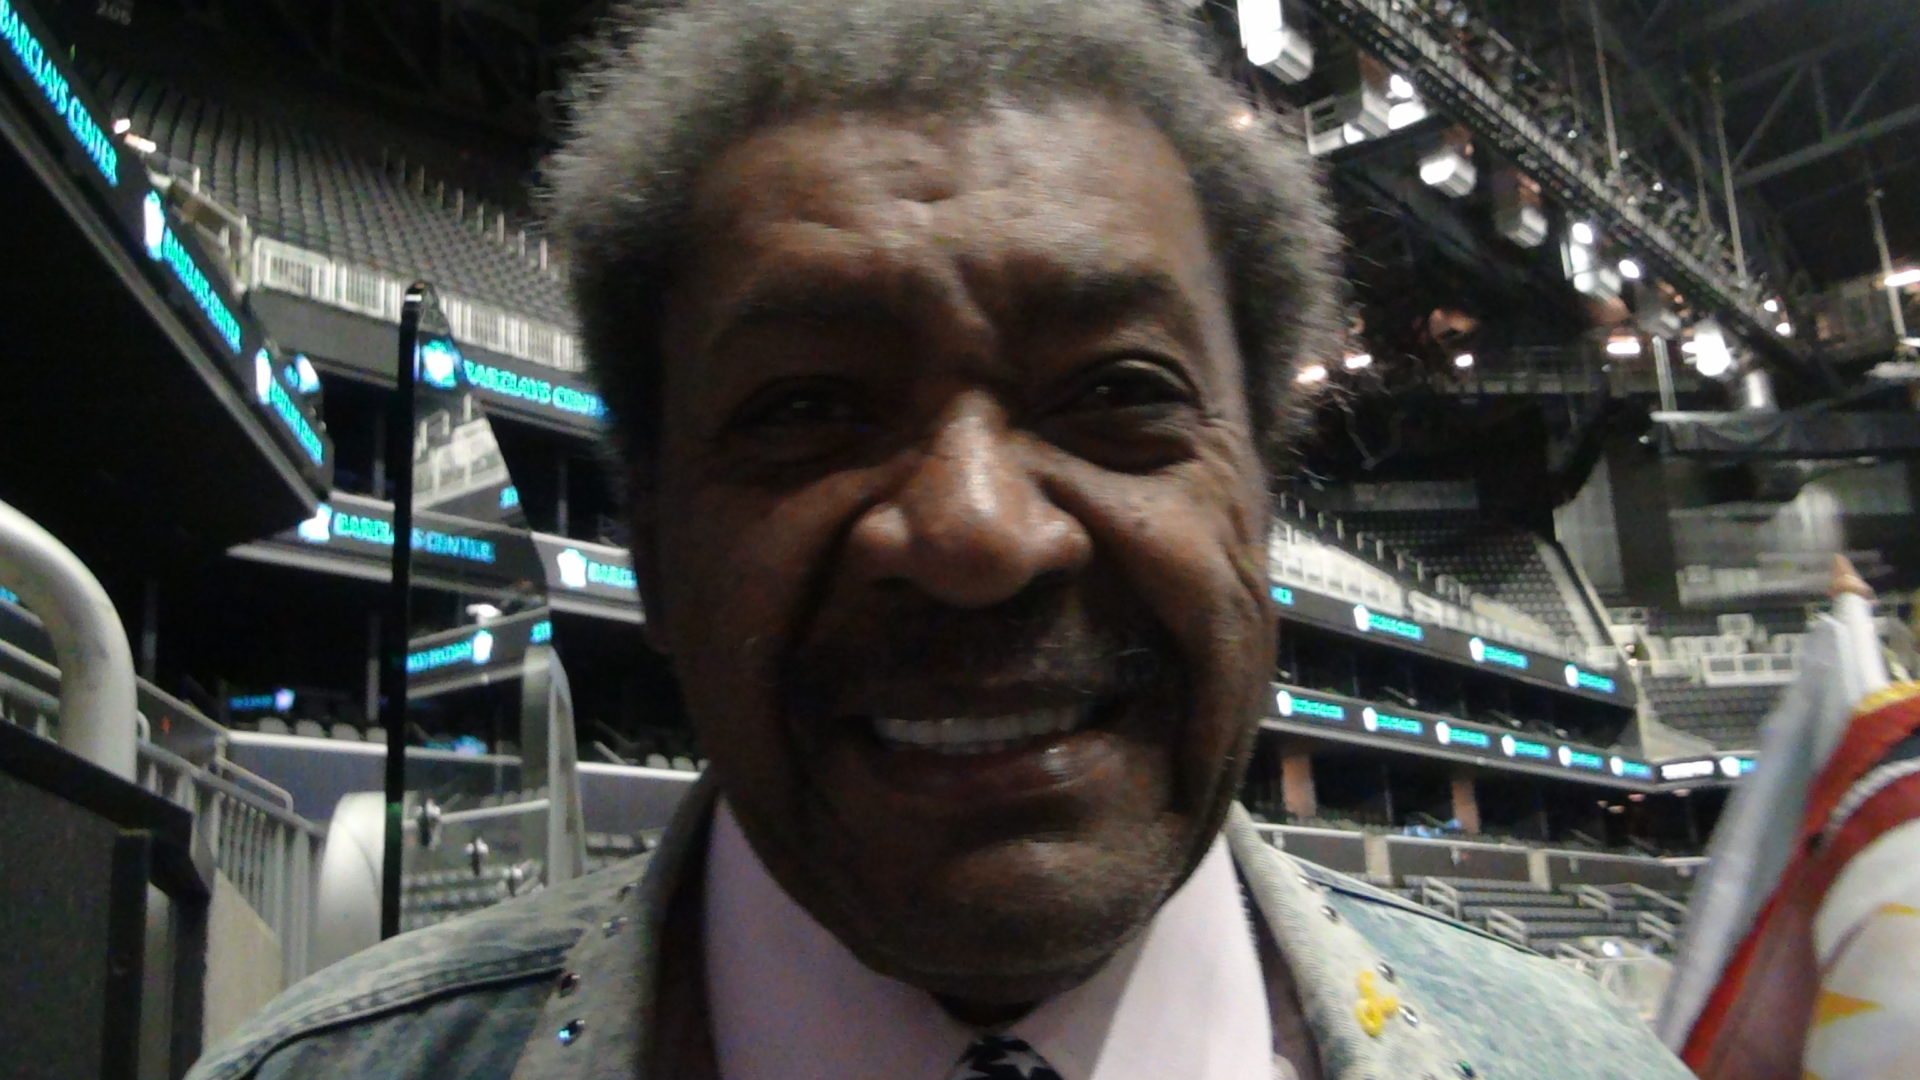 King of the Podium Don King back in his element at heavyweight news